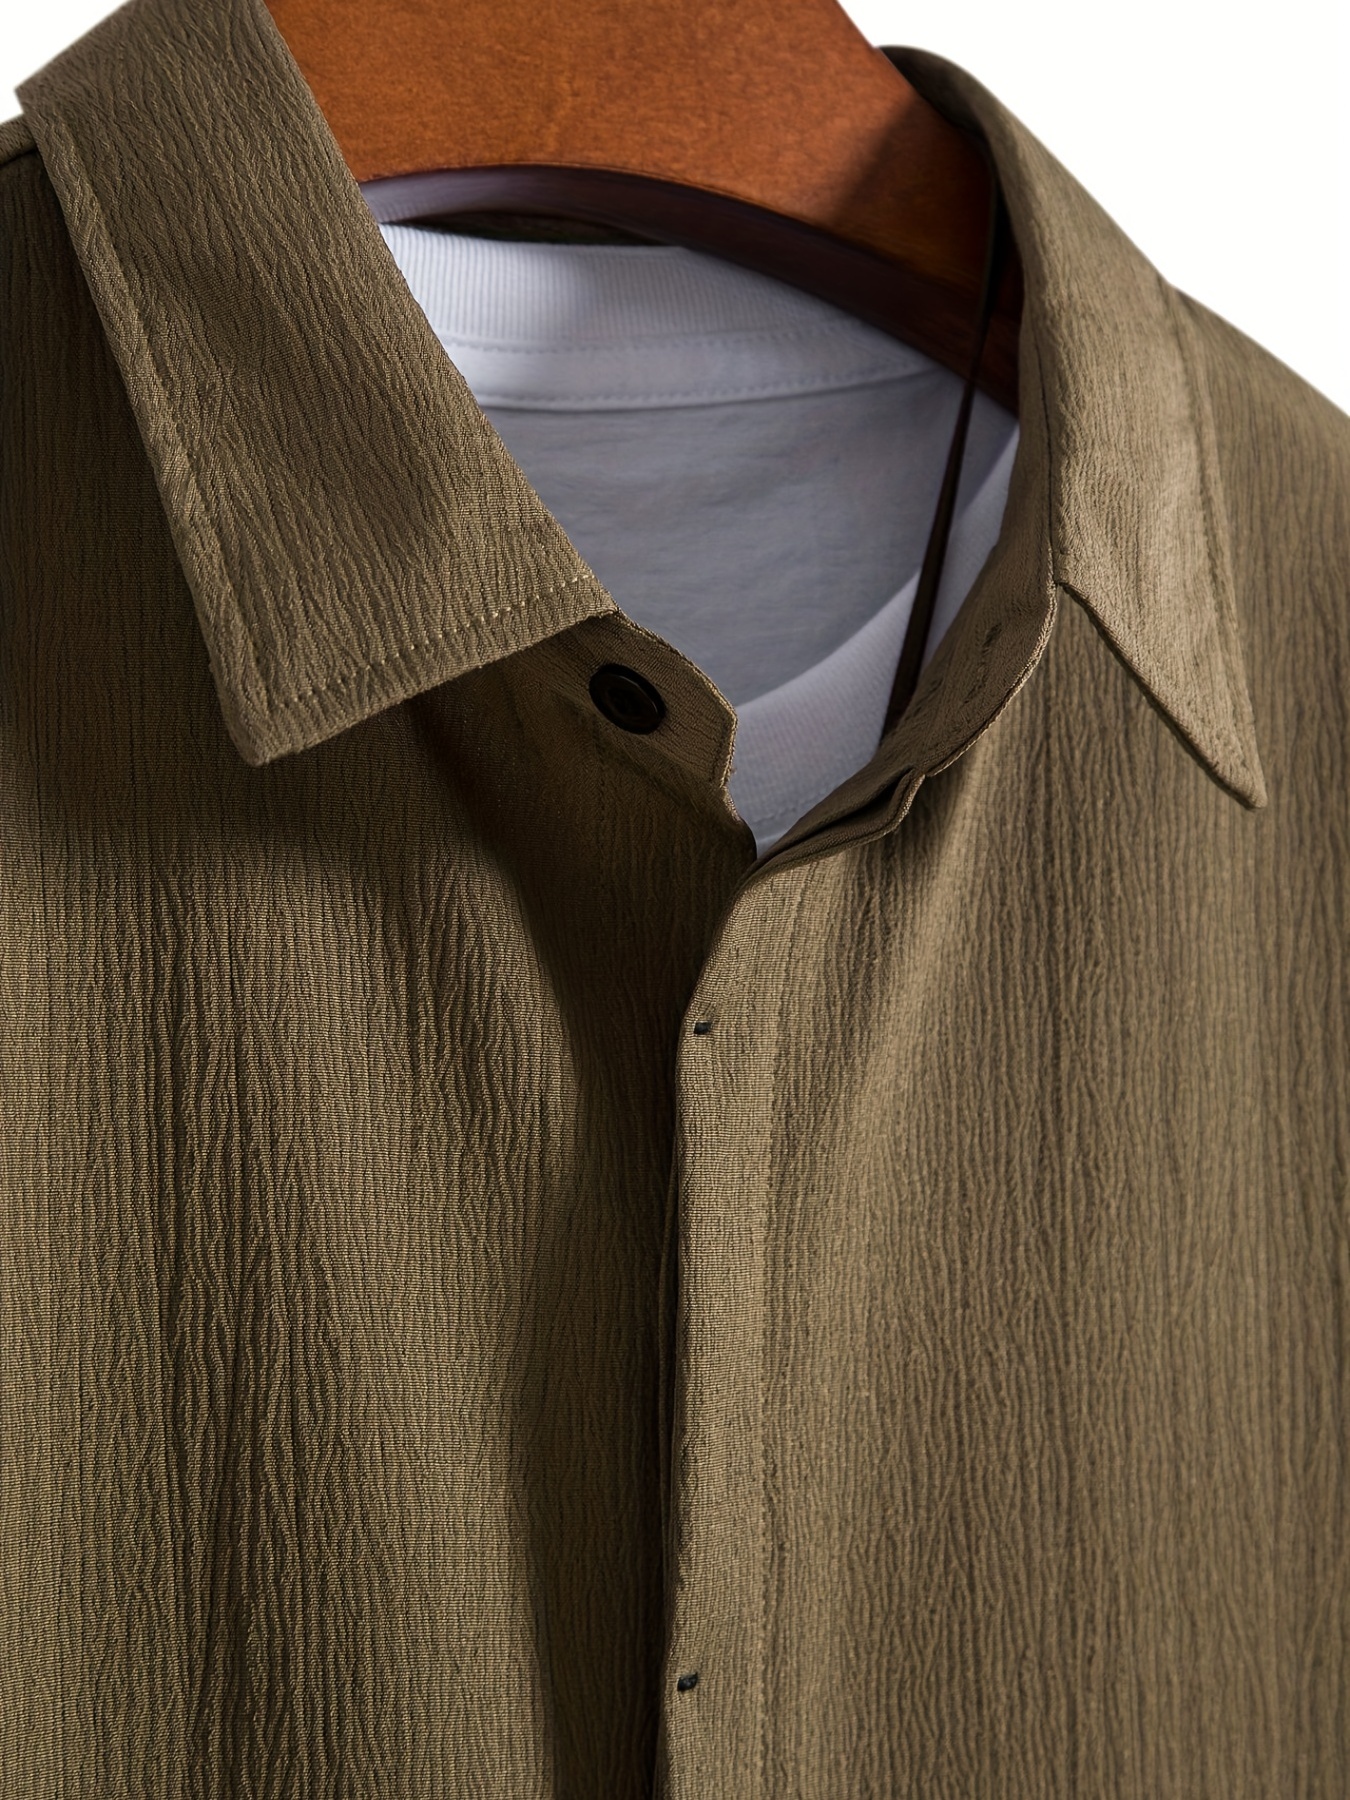 Olive and Oak Solid Tan Long Sleeve Button-Down Shirt Size XL - 68